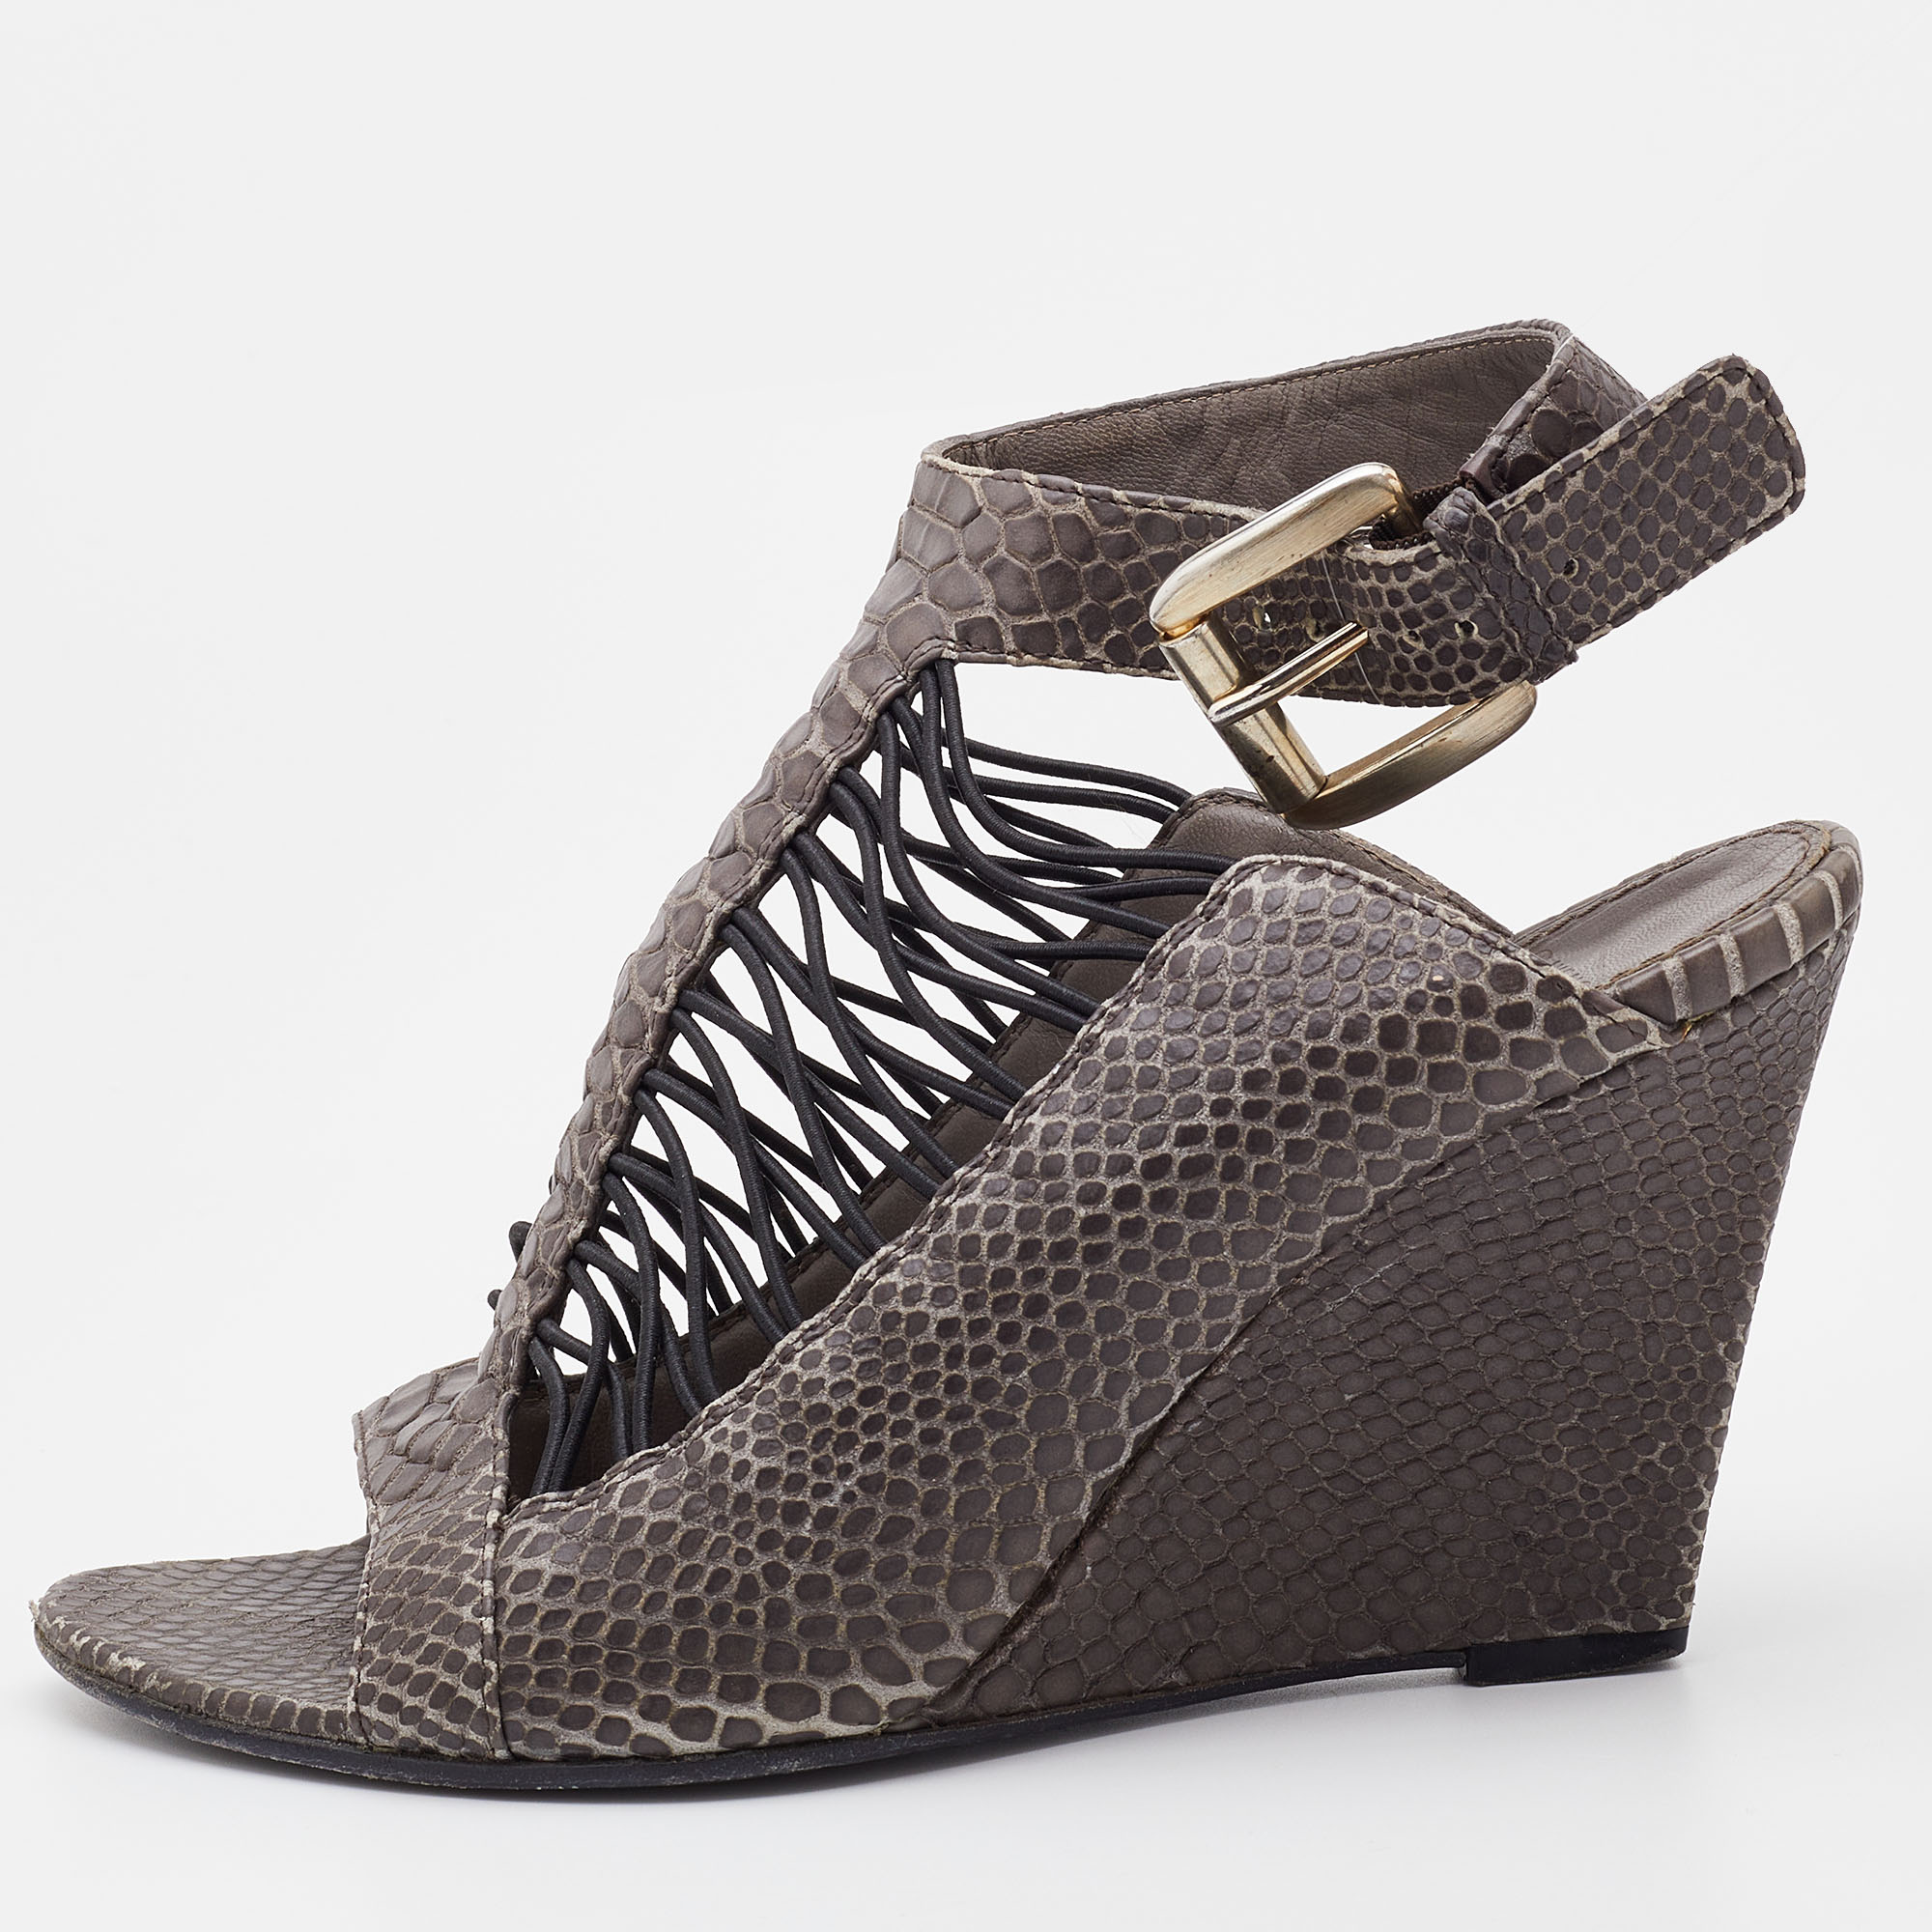 Givenchy grey python embossed leather wedge ankle strap sandals size 37.5